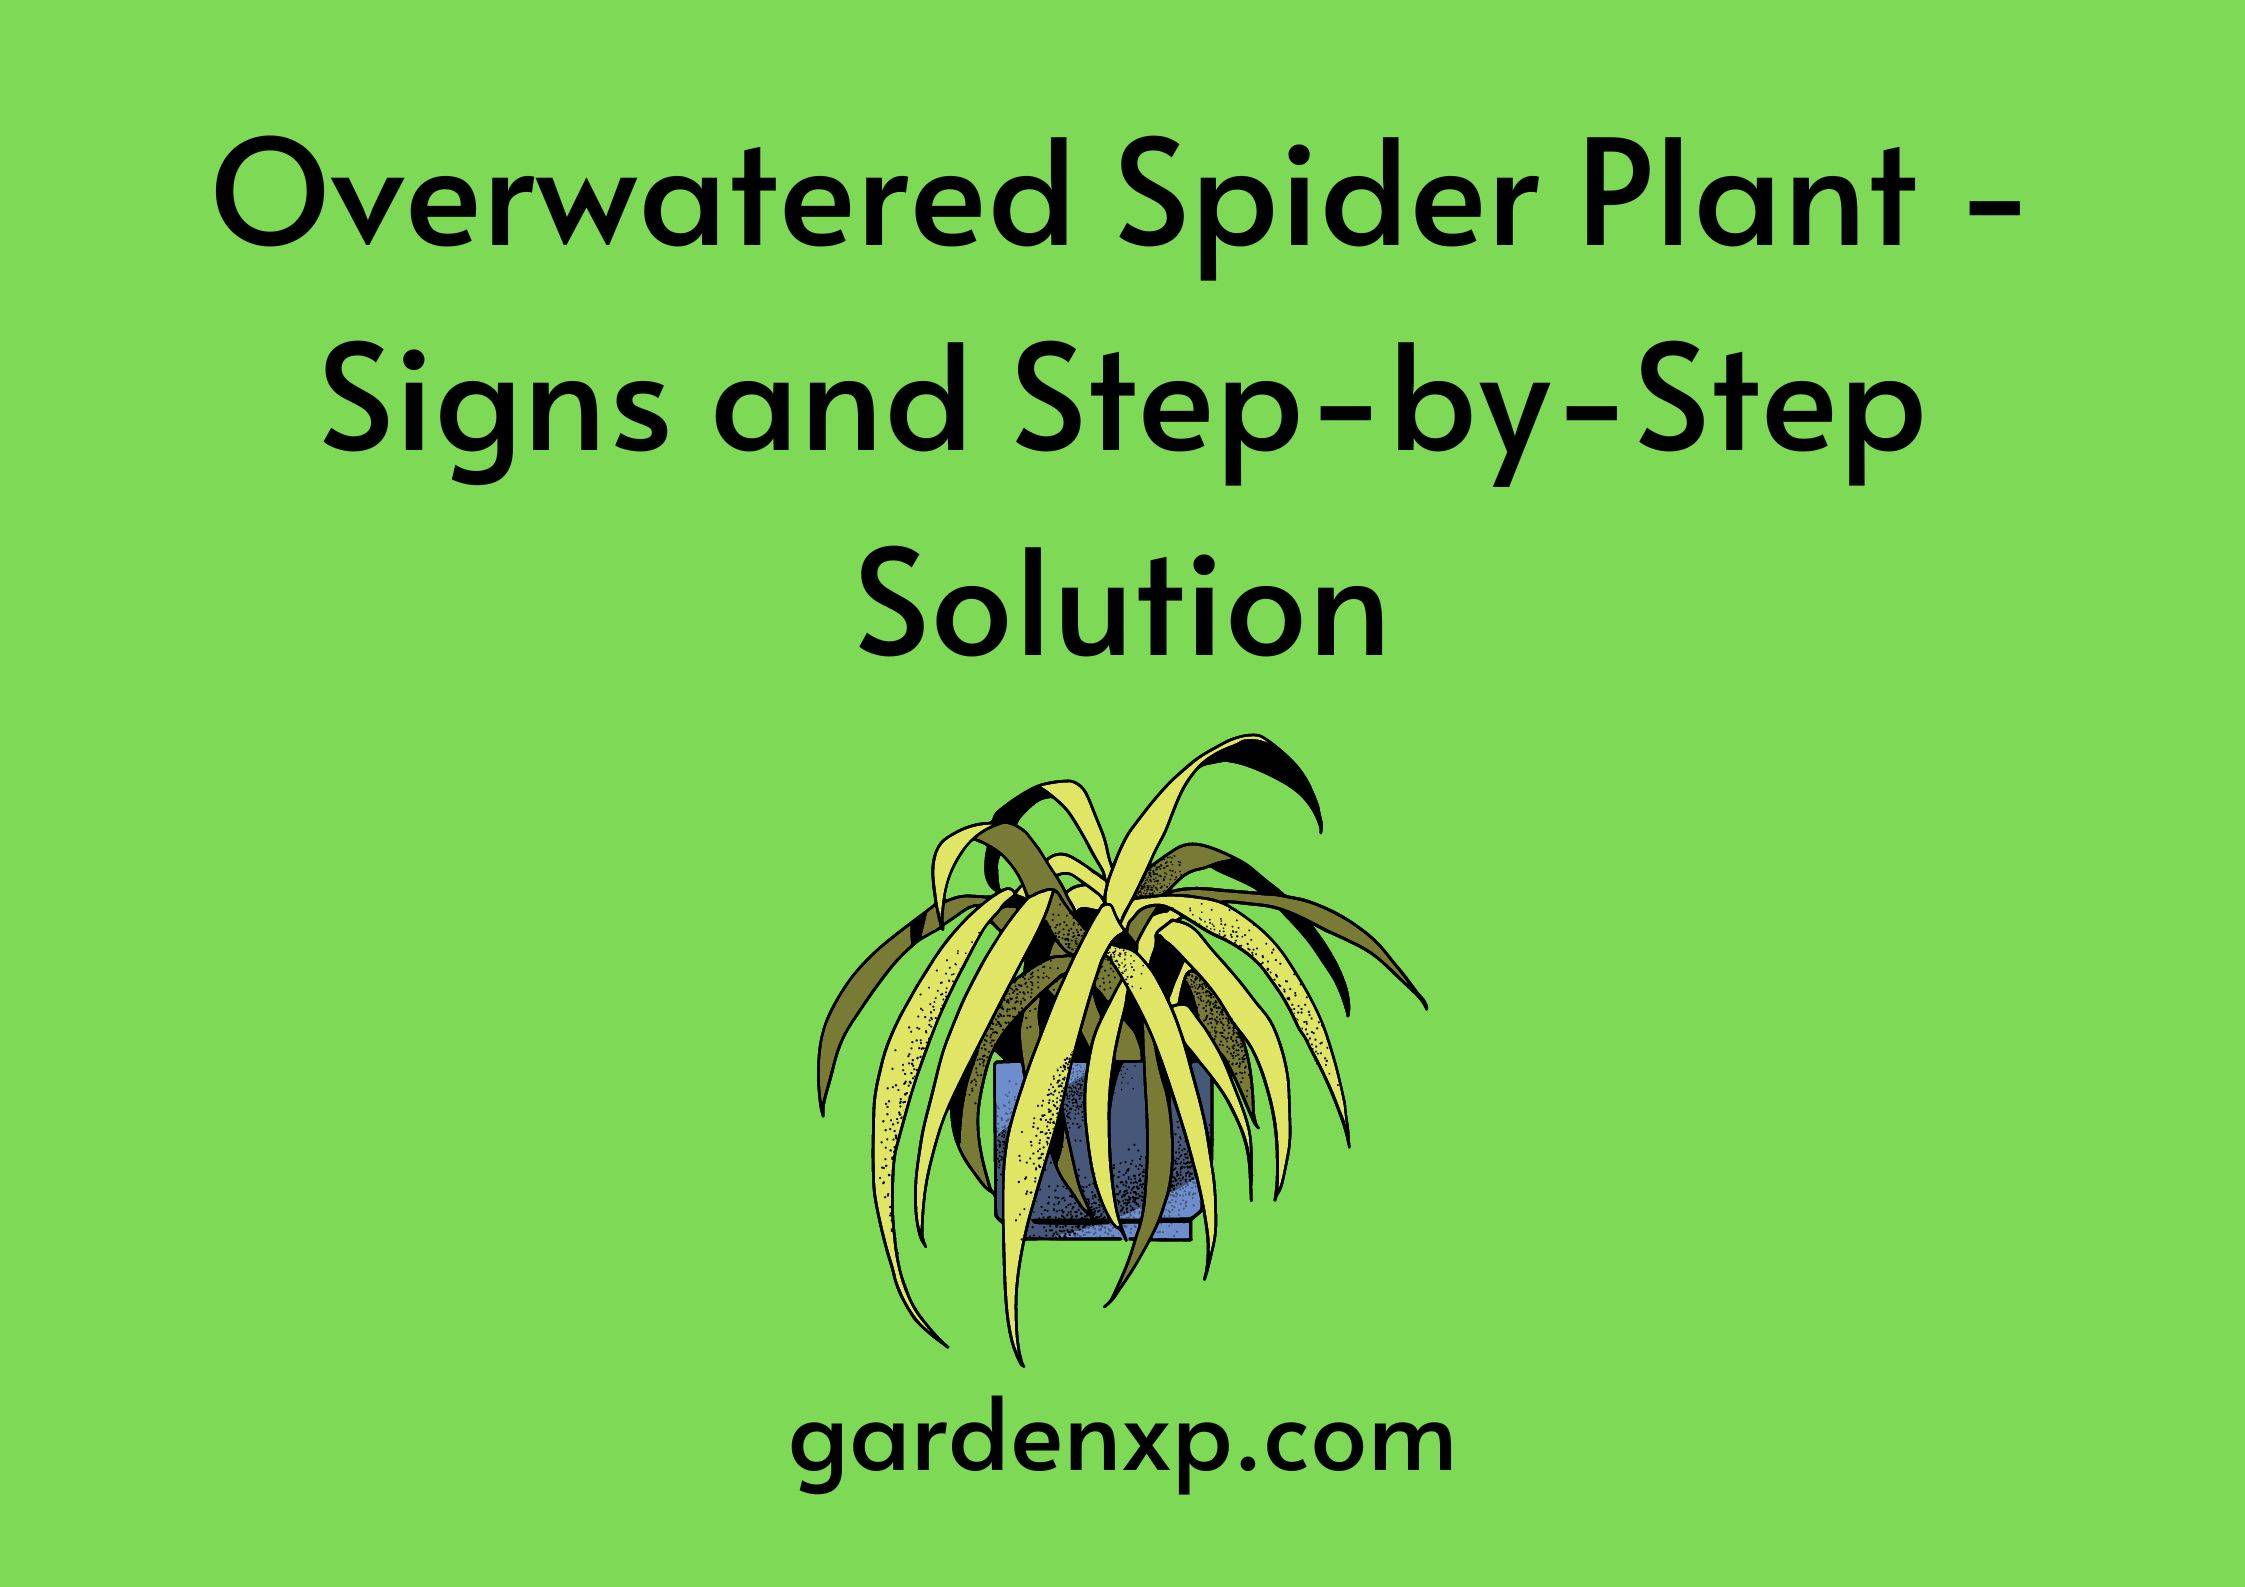 Overwatered Spider Plant -Signs and Step-by-Step Solution